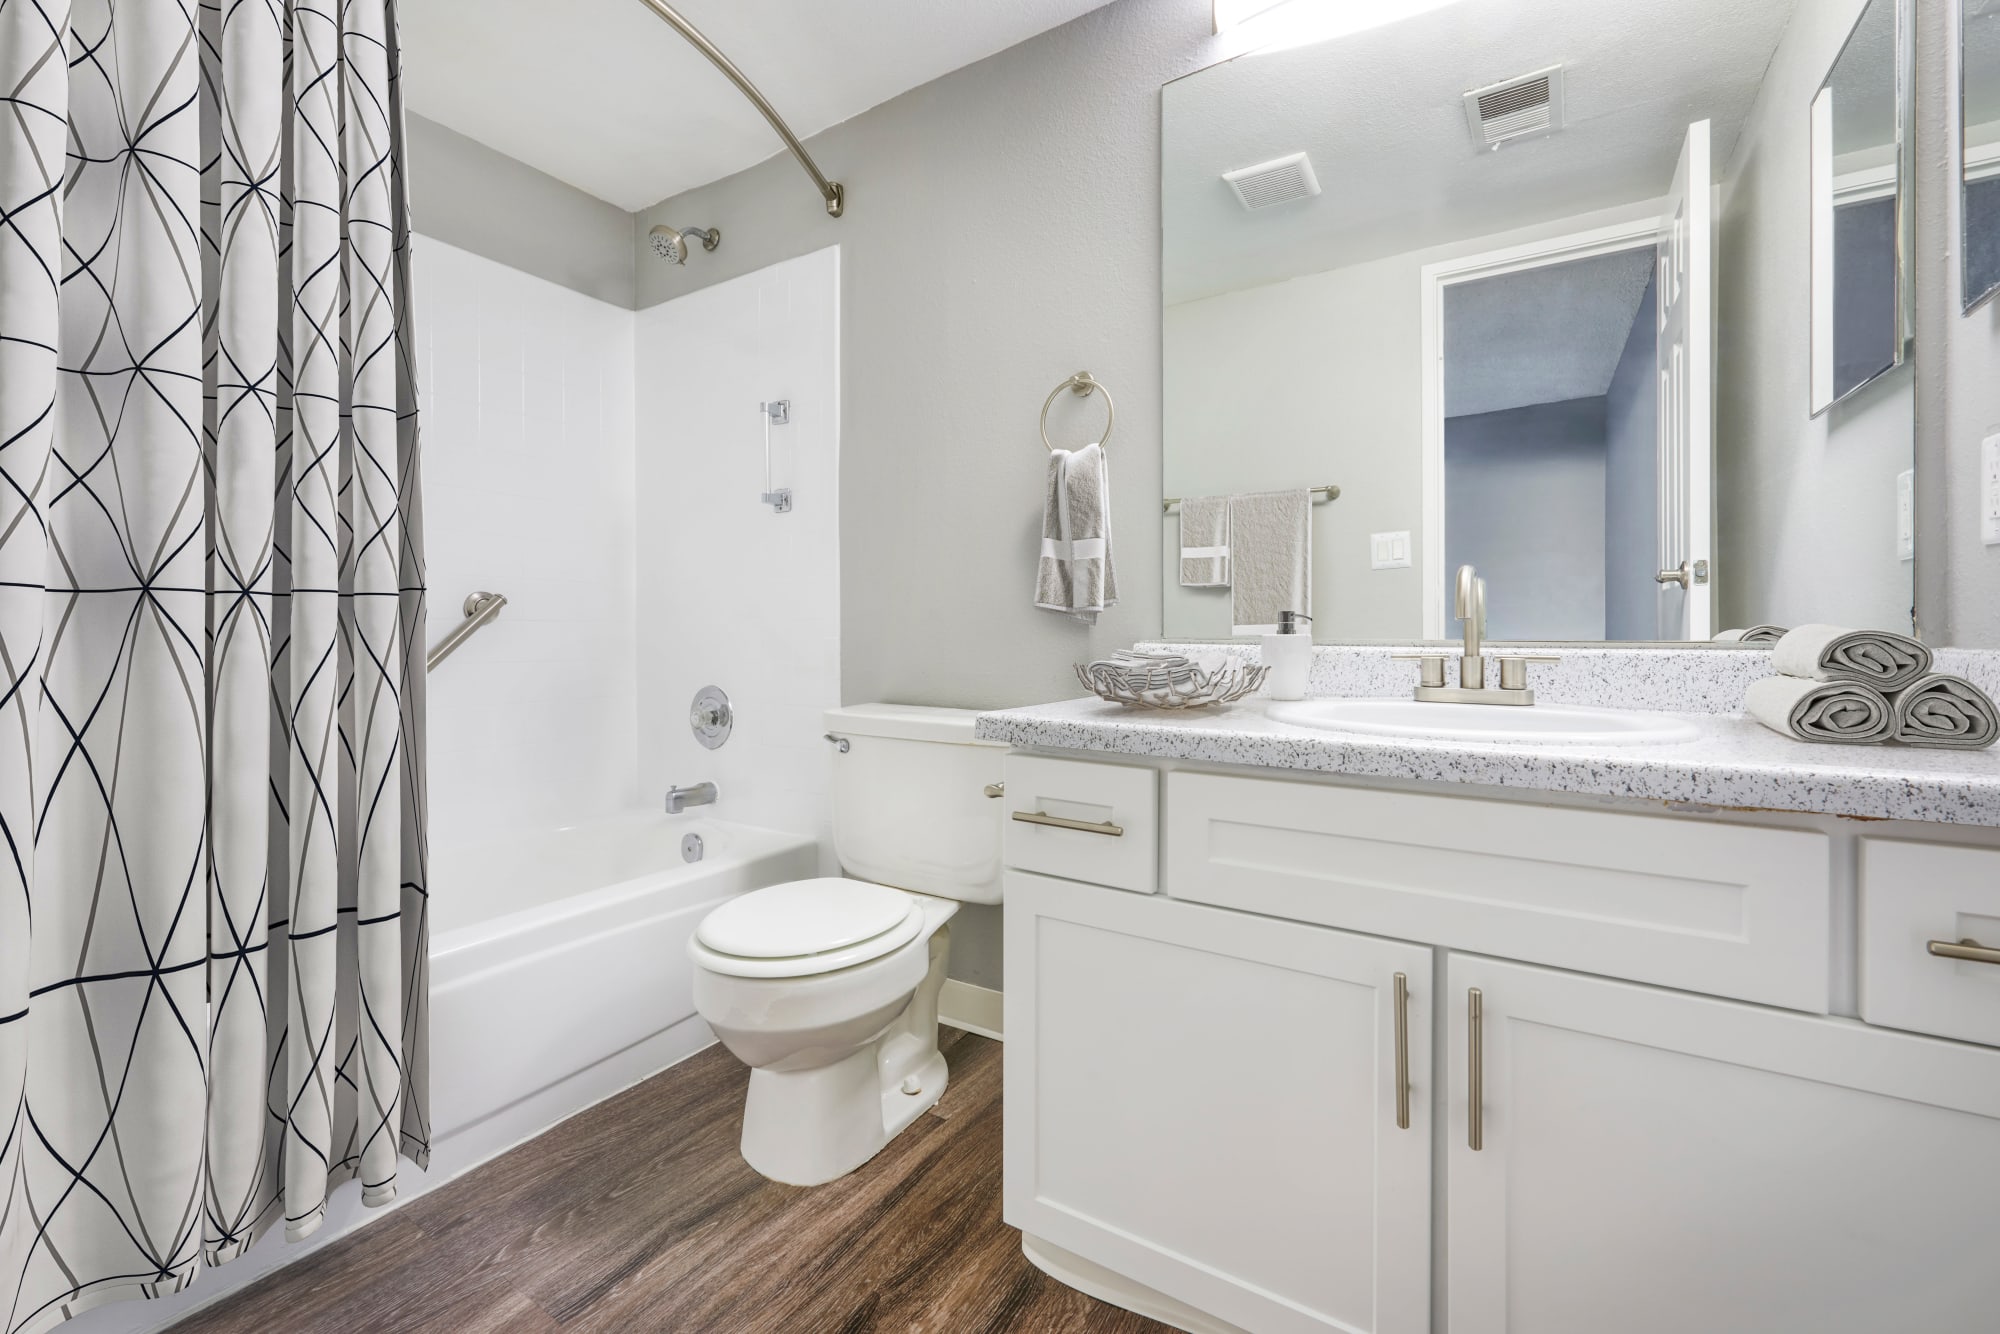 A model bathroom with white cabinets at Alton Green Apartments in Denver, Colorado